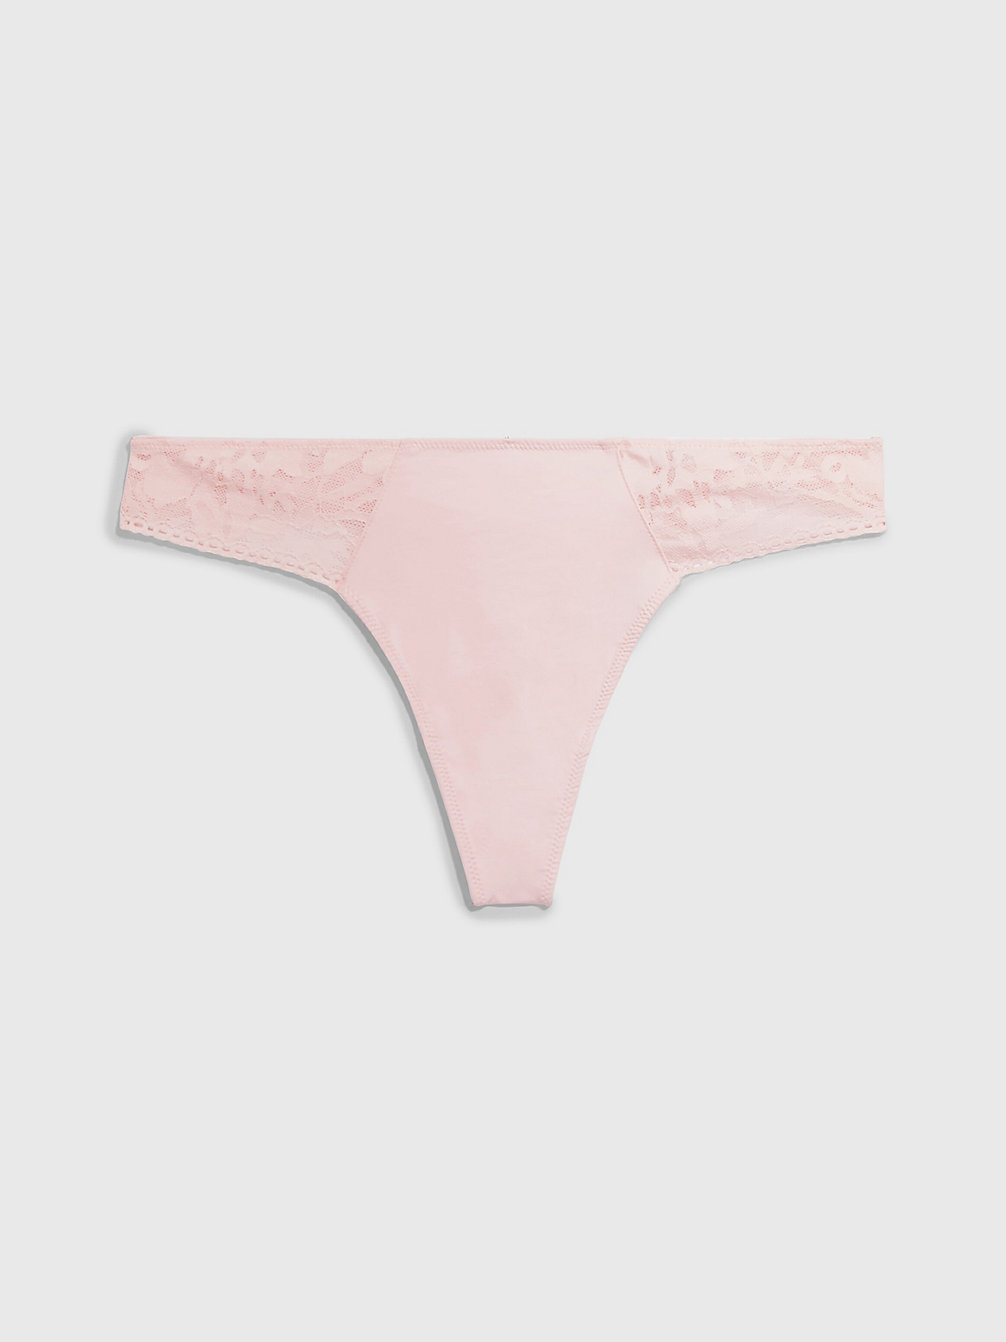 NYMPTHÂ€™S THIGH String - Ultra Soft Lace undefined femmes Calvin Klein